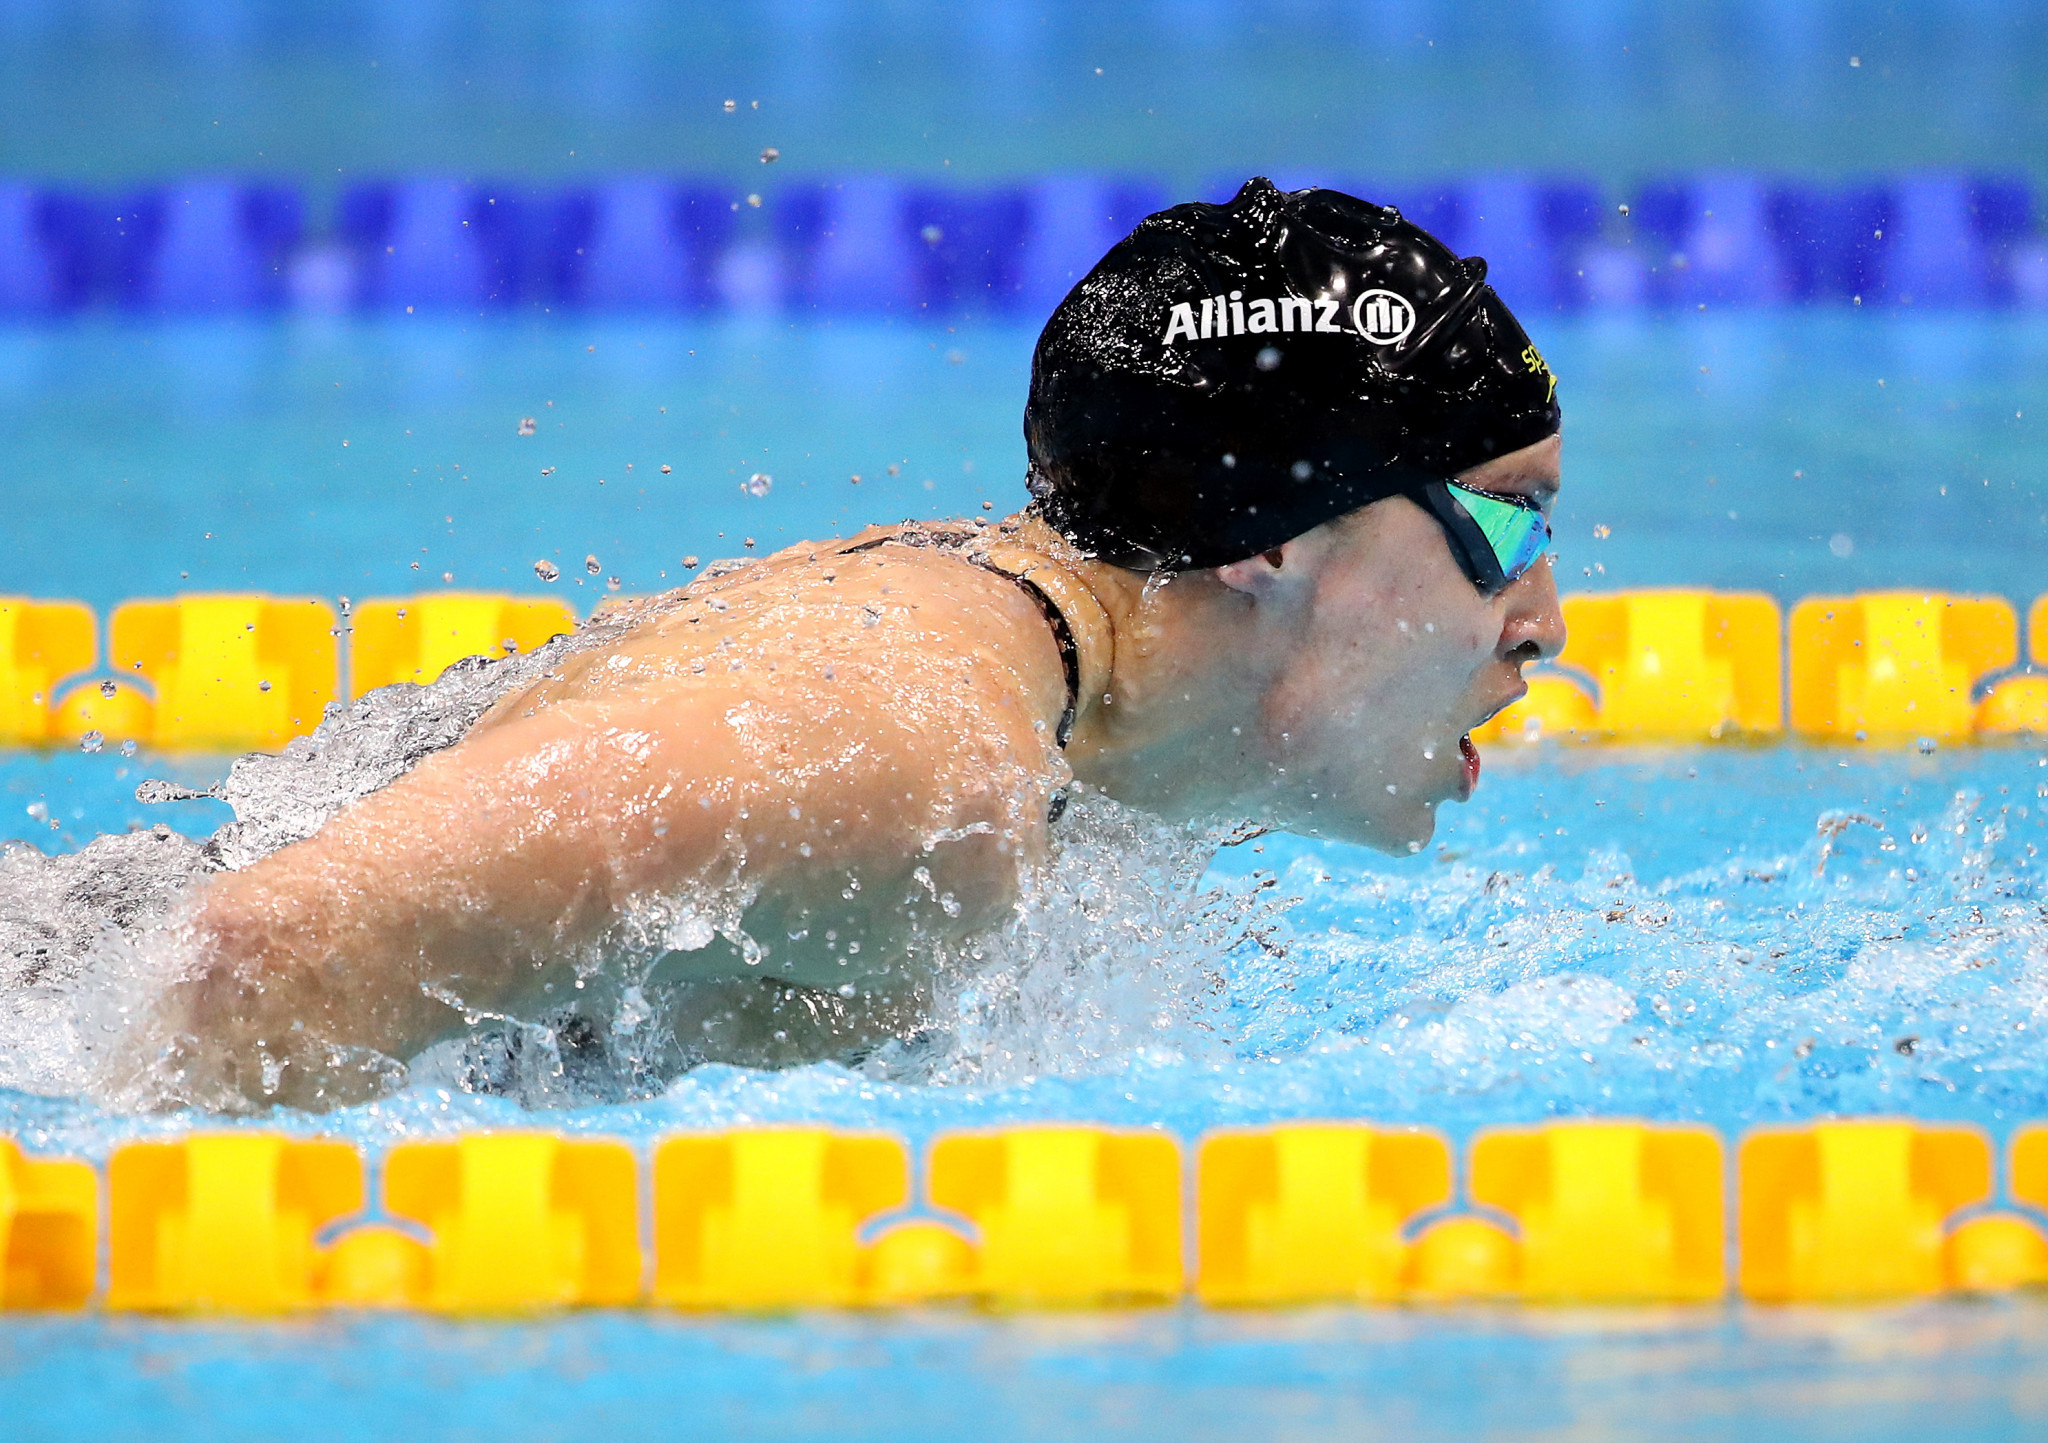 New Zealand's Sophie Pascoe took the narrowest win of the day with just two points separating her and her rival, Australia's Tiffany Thomas Kane, at the World Para Swimming Series in Melbourne ©Getty Images